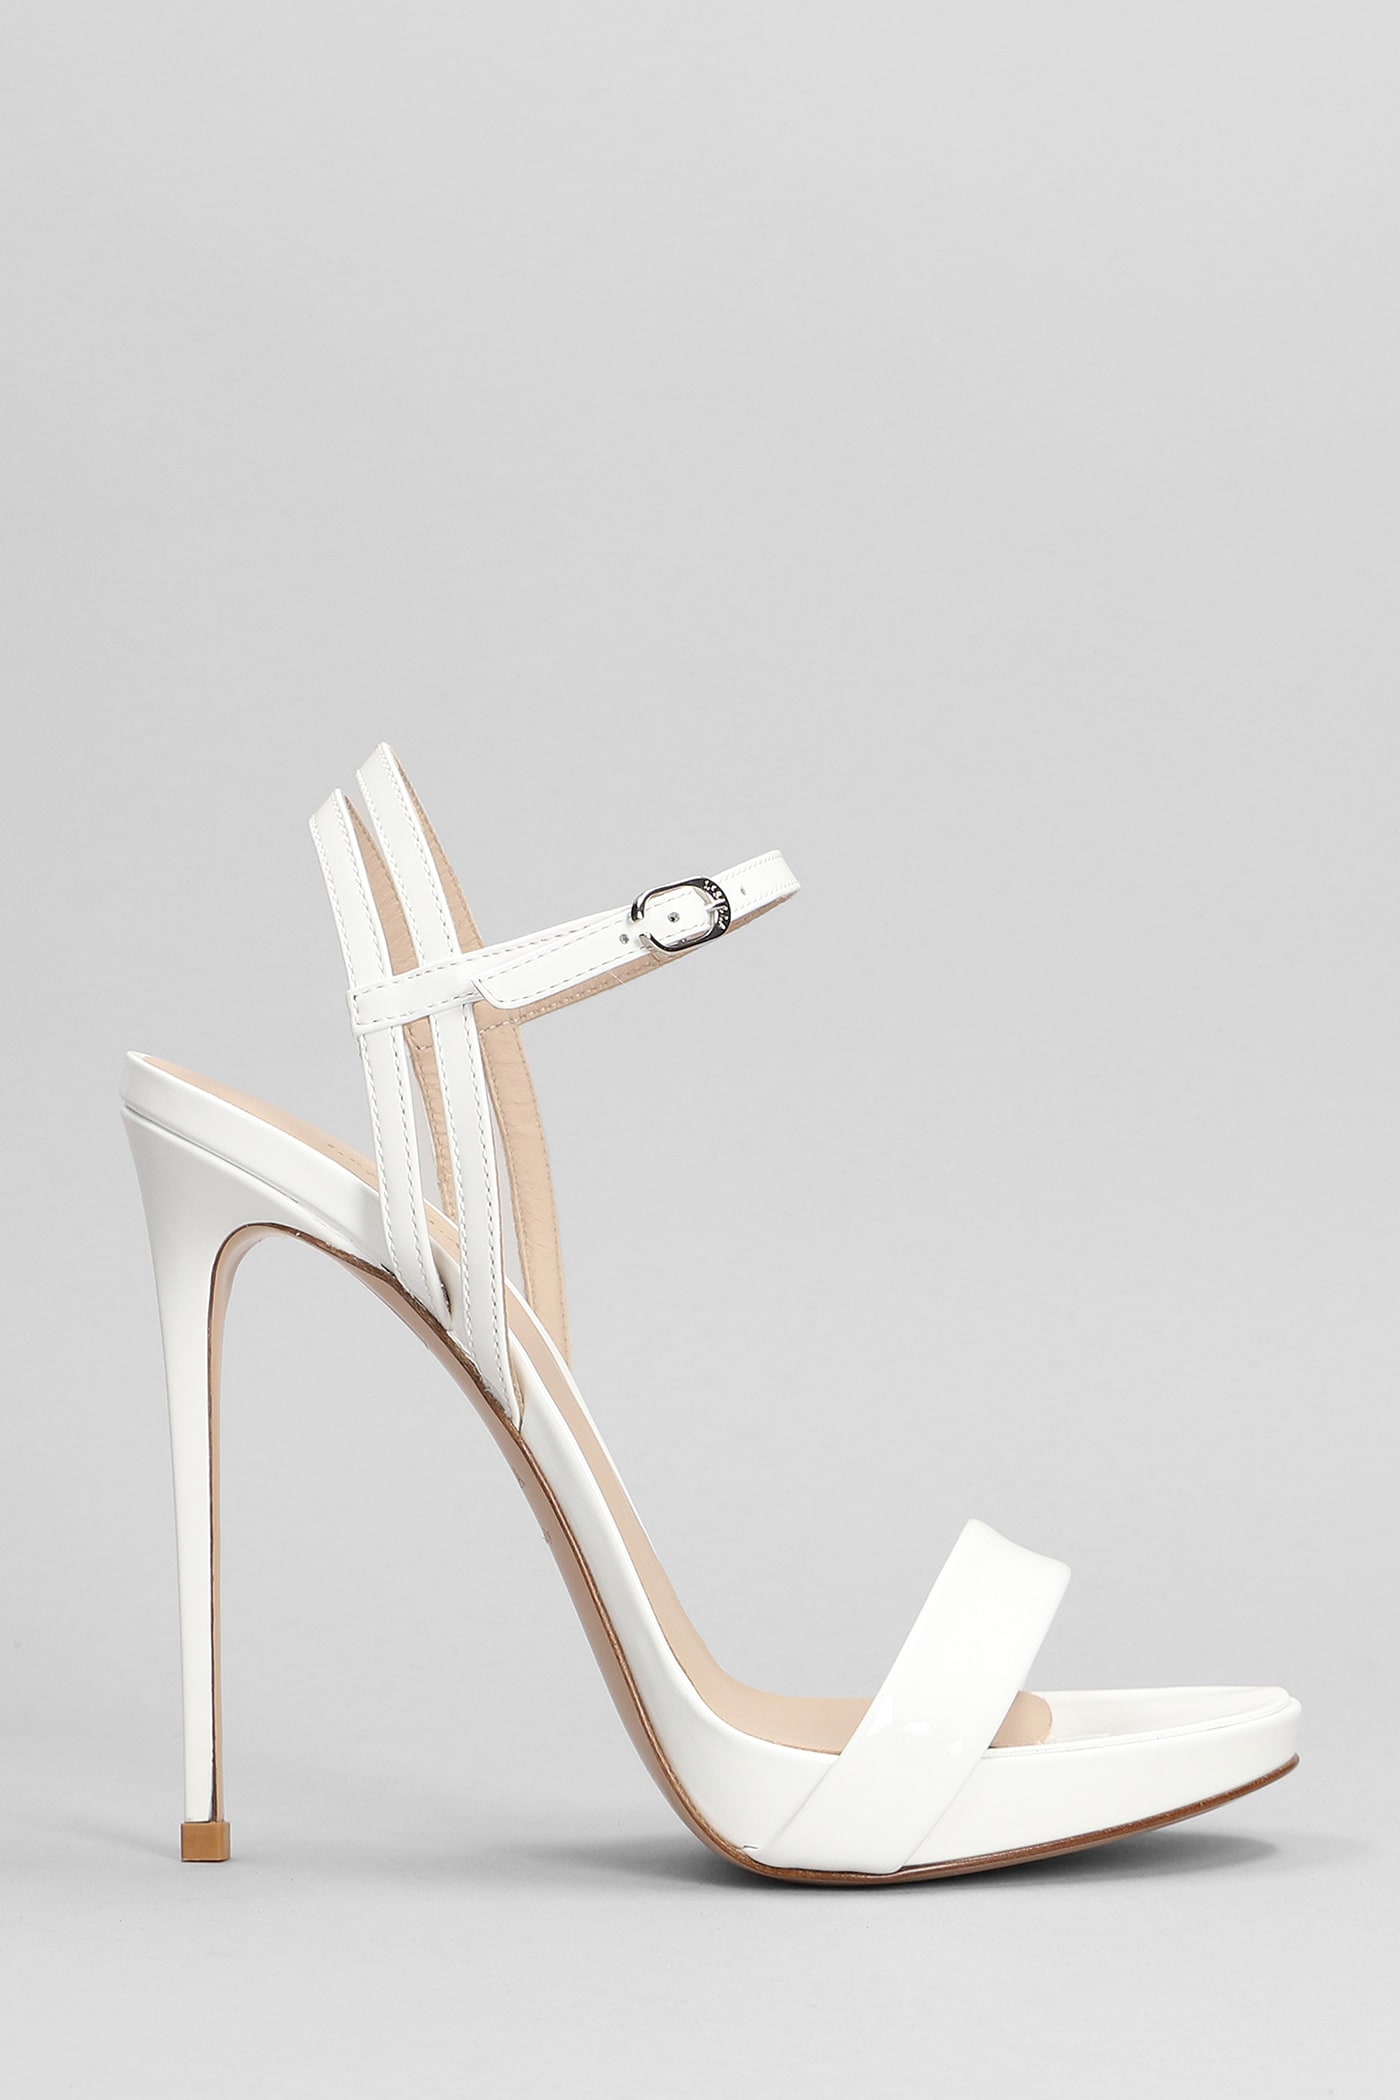 LE SILLA GWEN SANDALS IN WHITE PATENT LEATHER